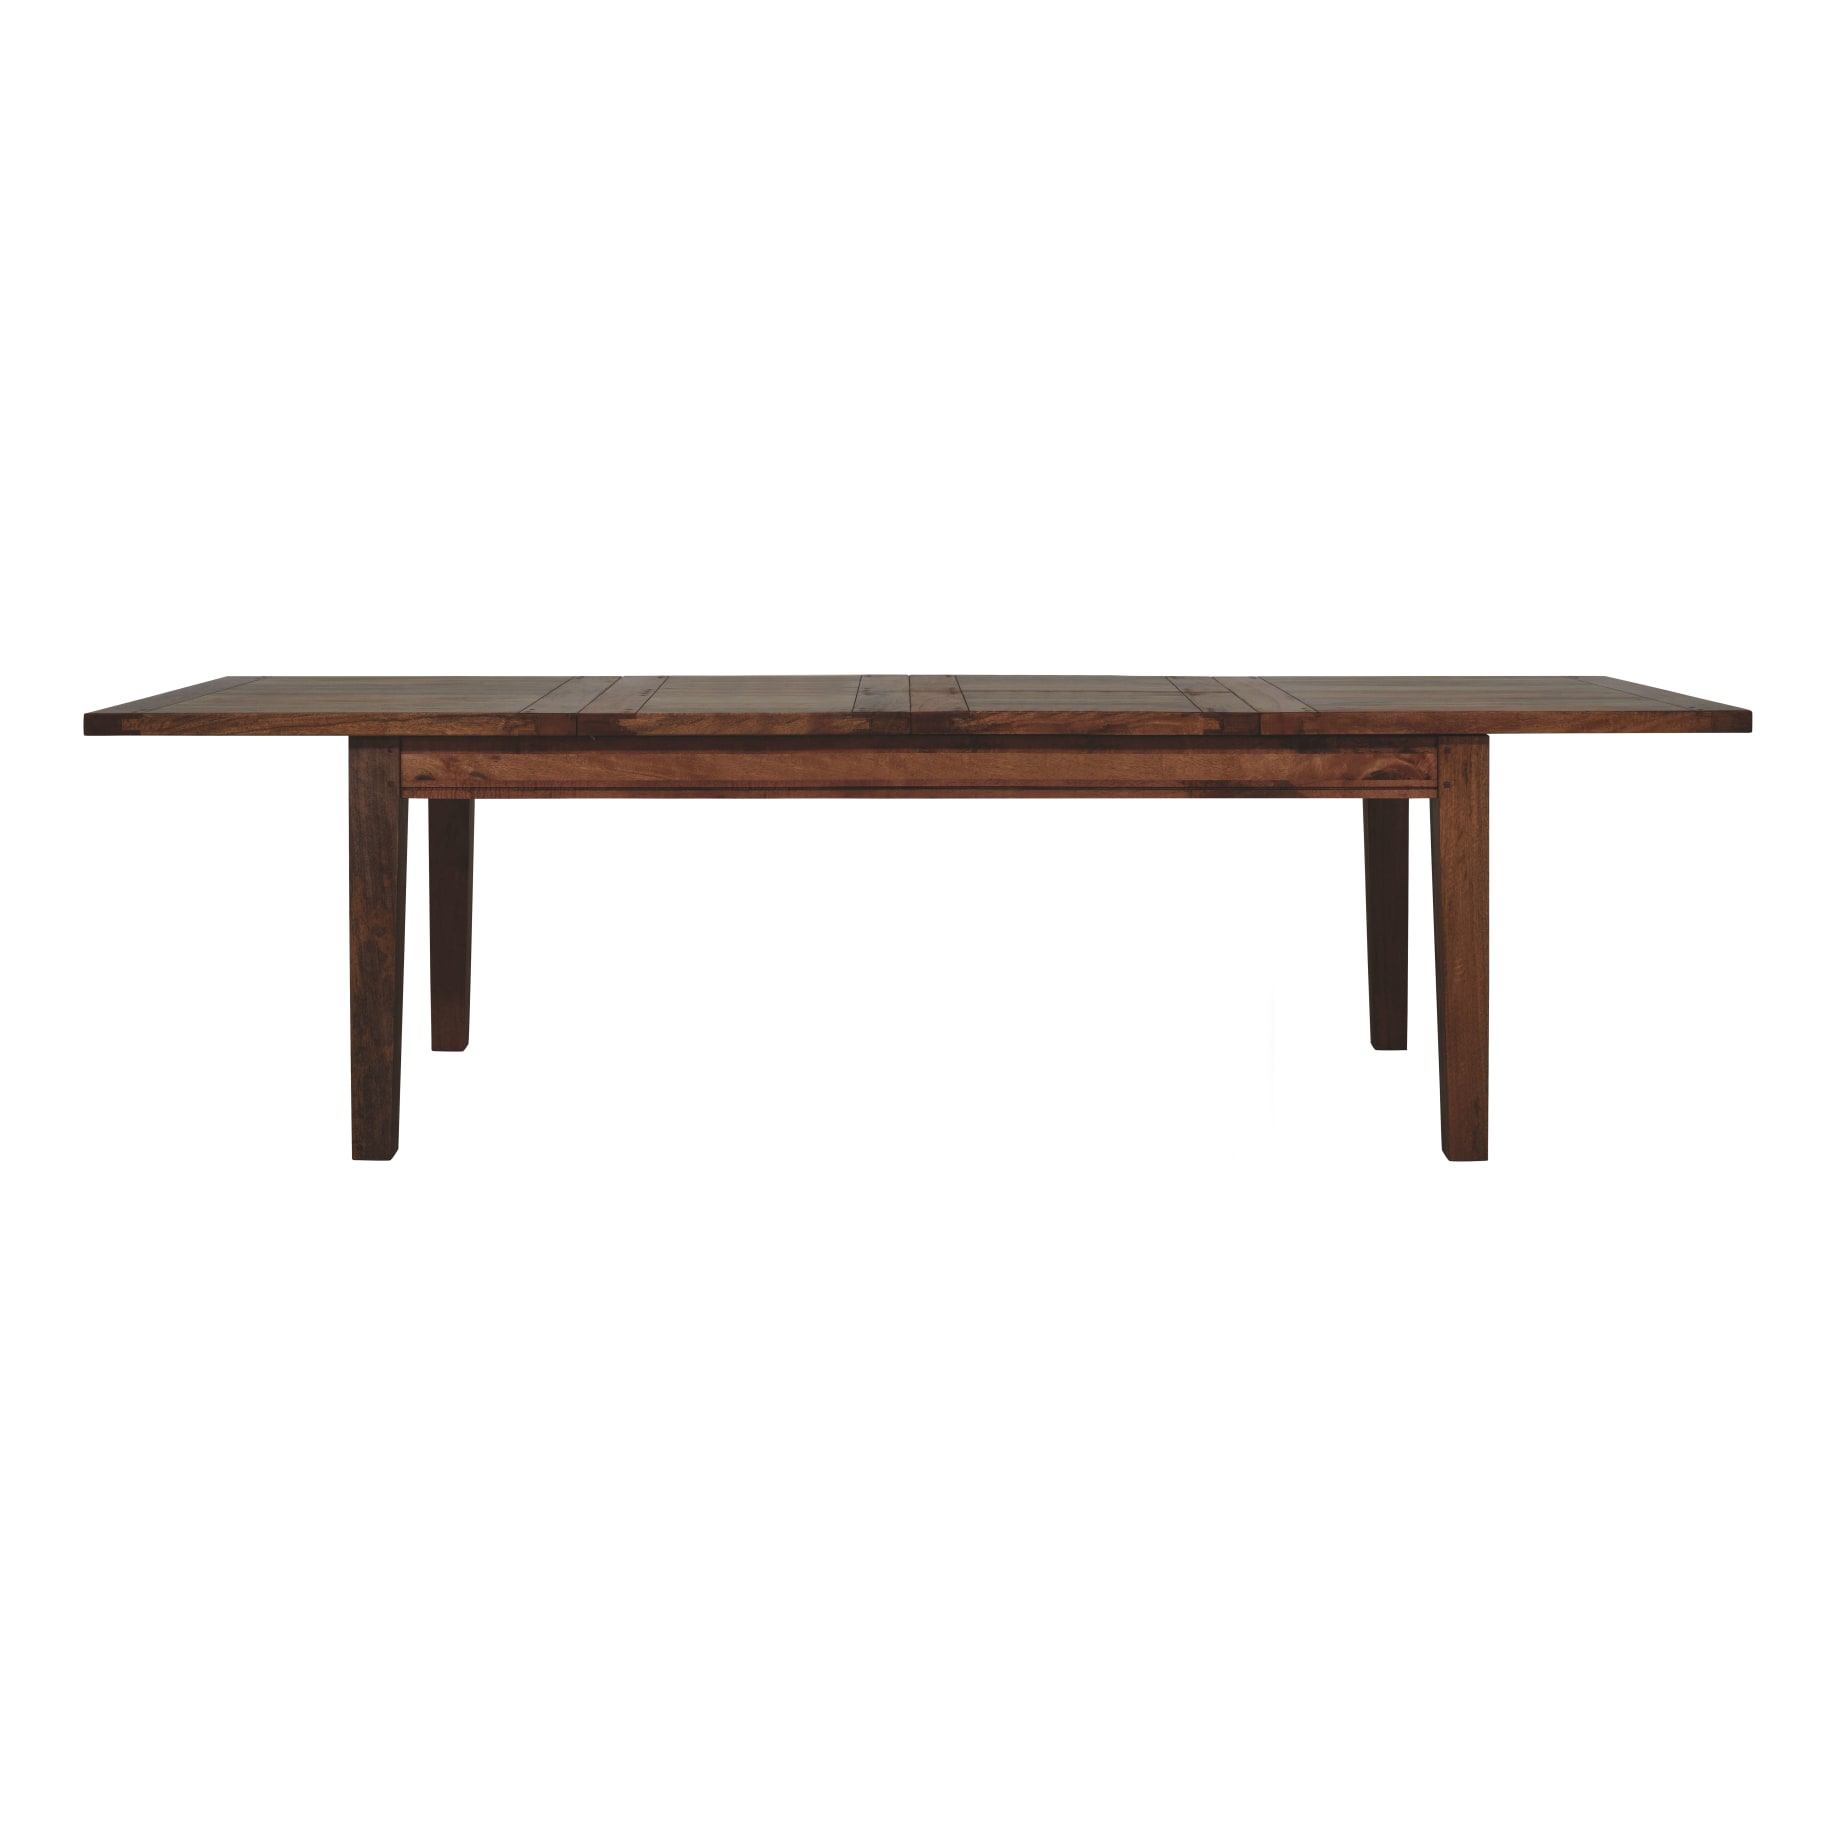 Mango Creek Extension Dining Table 210-310cm in Rustic Chocolate